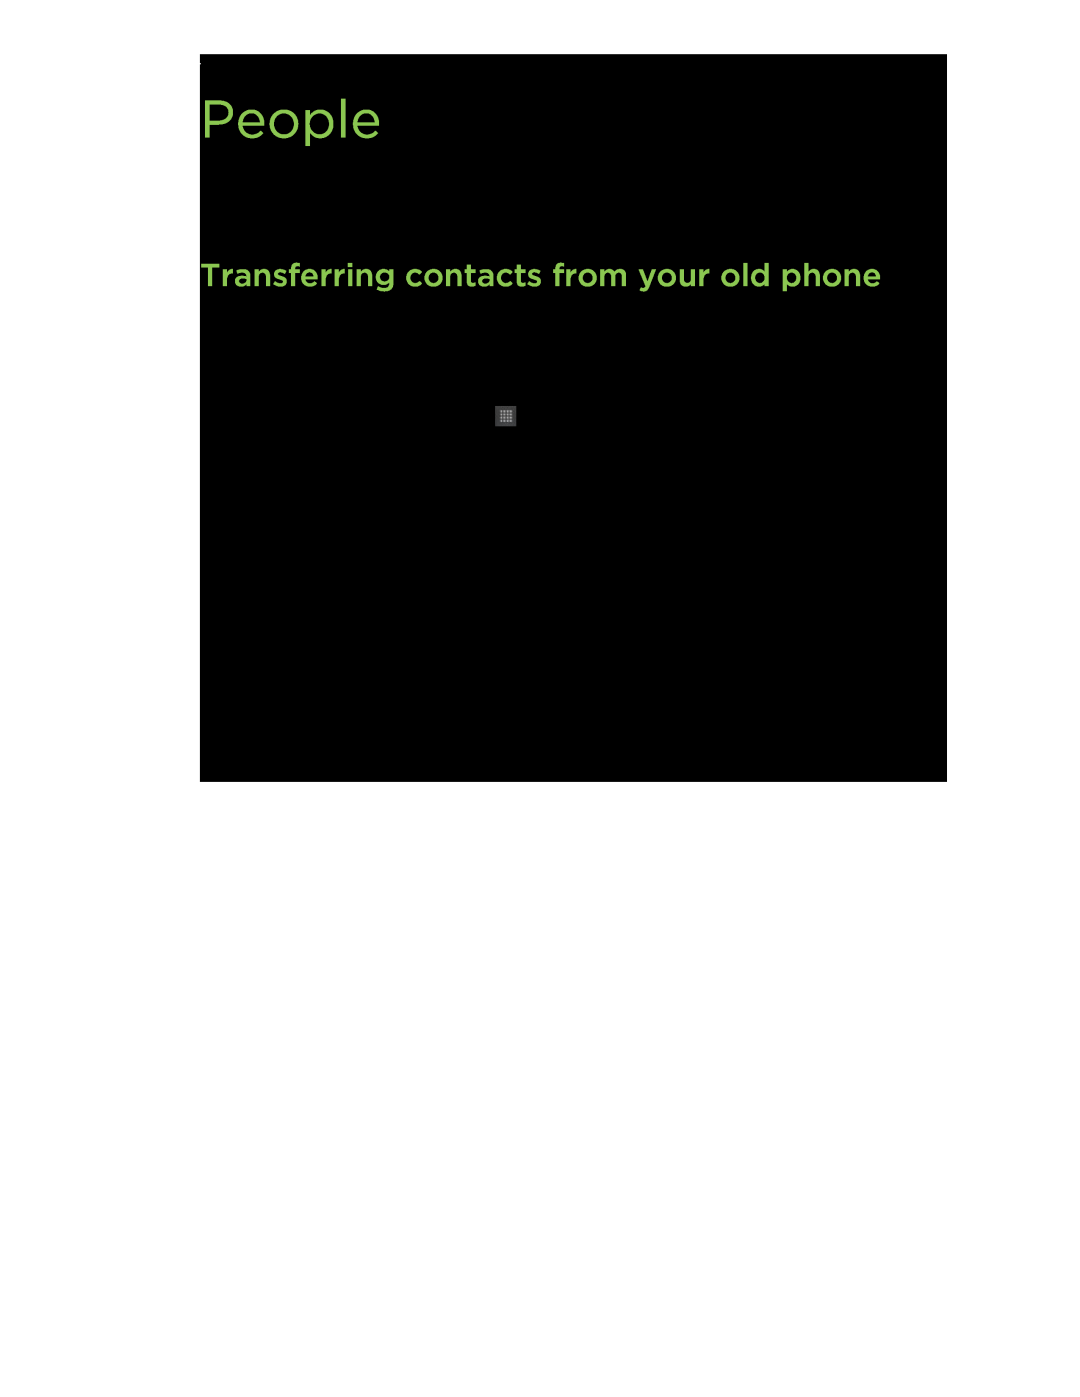 HTC HTCFlyerP512 manual People, Transferring contacts from your old phone 